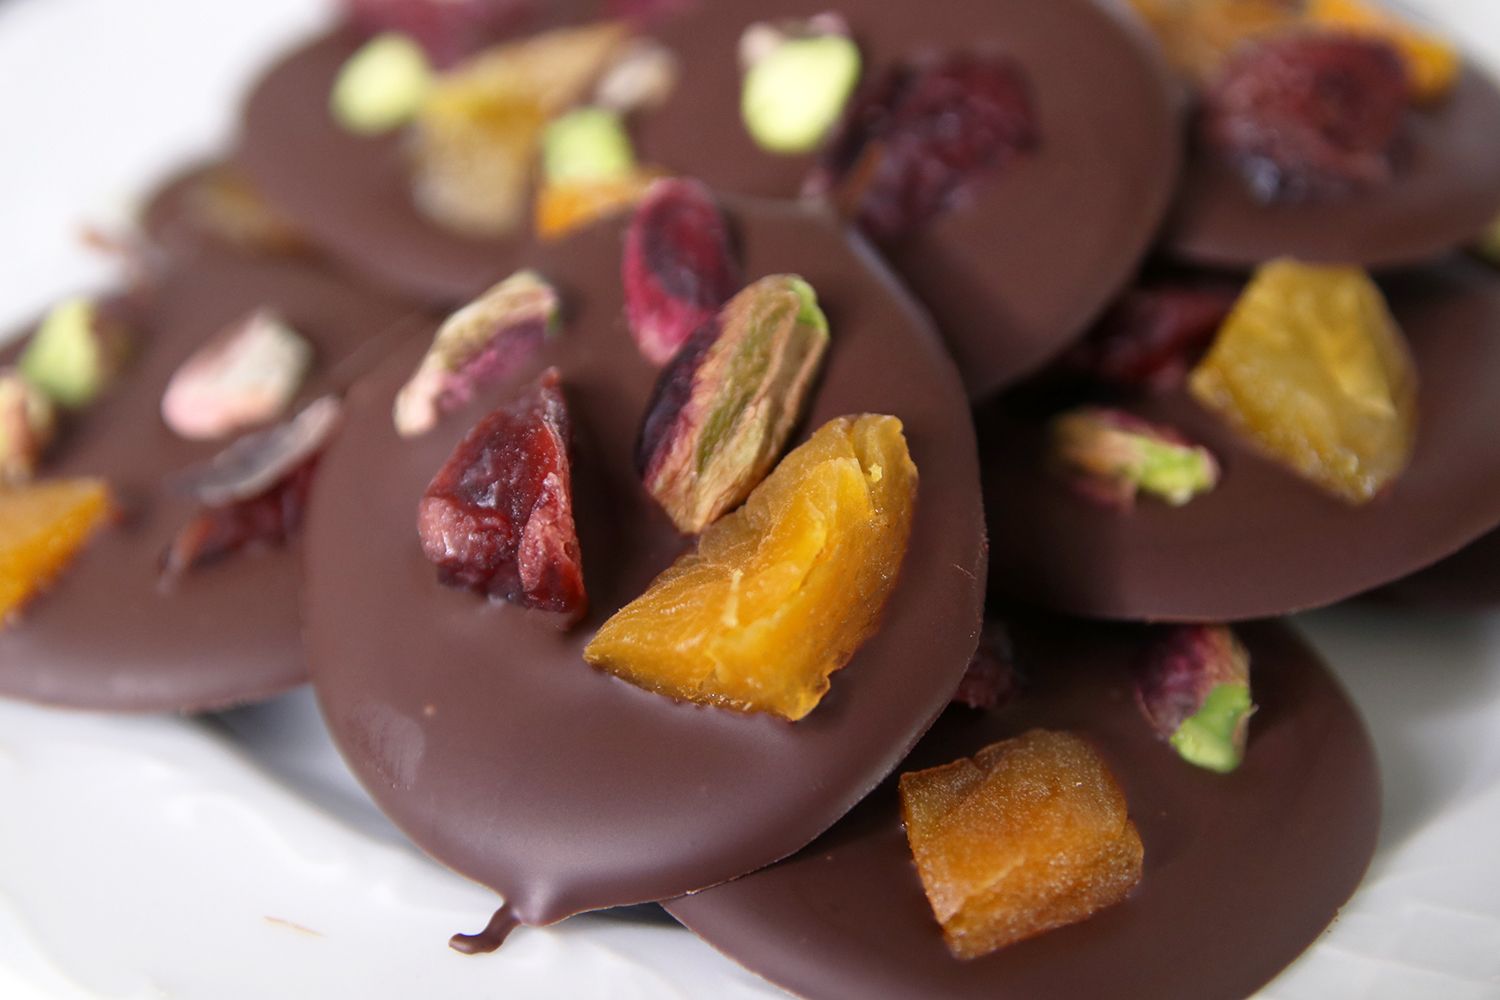 Chocolate Bars with Dried Fruits and Nuts | Lil' Cookie